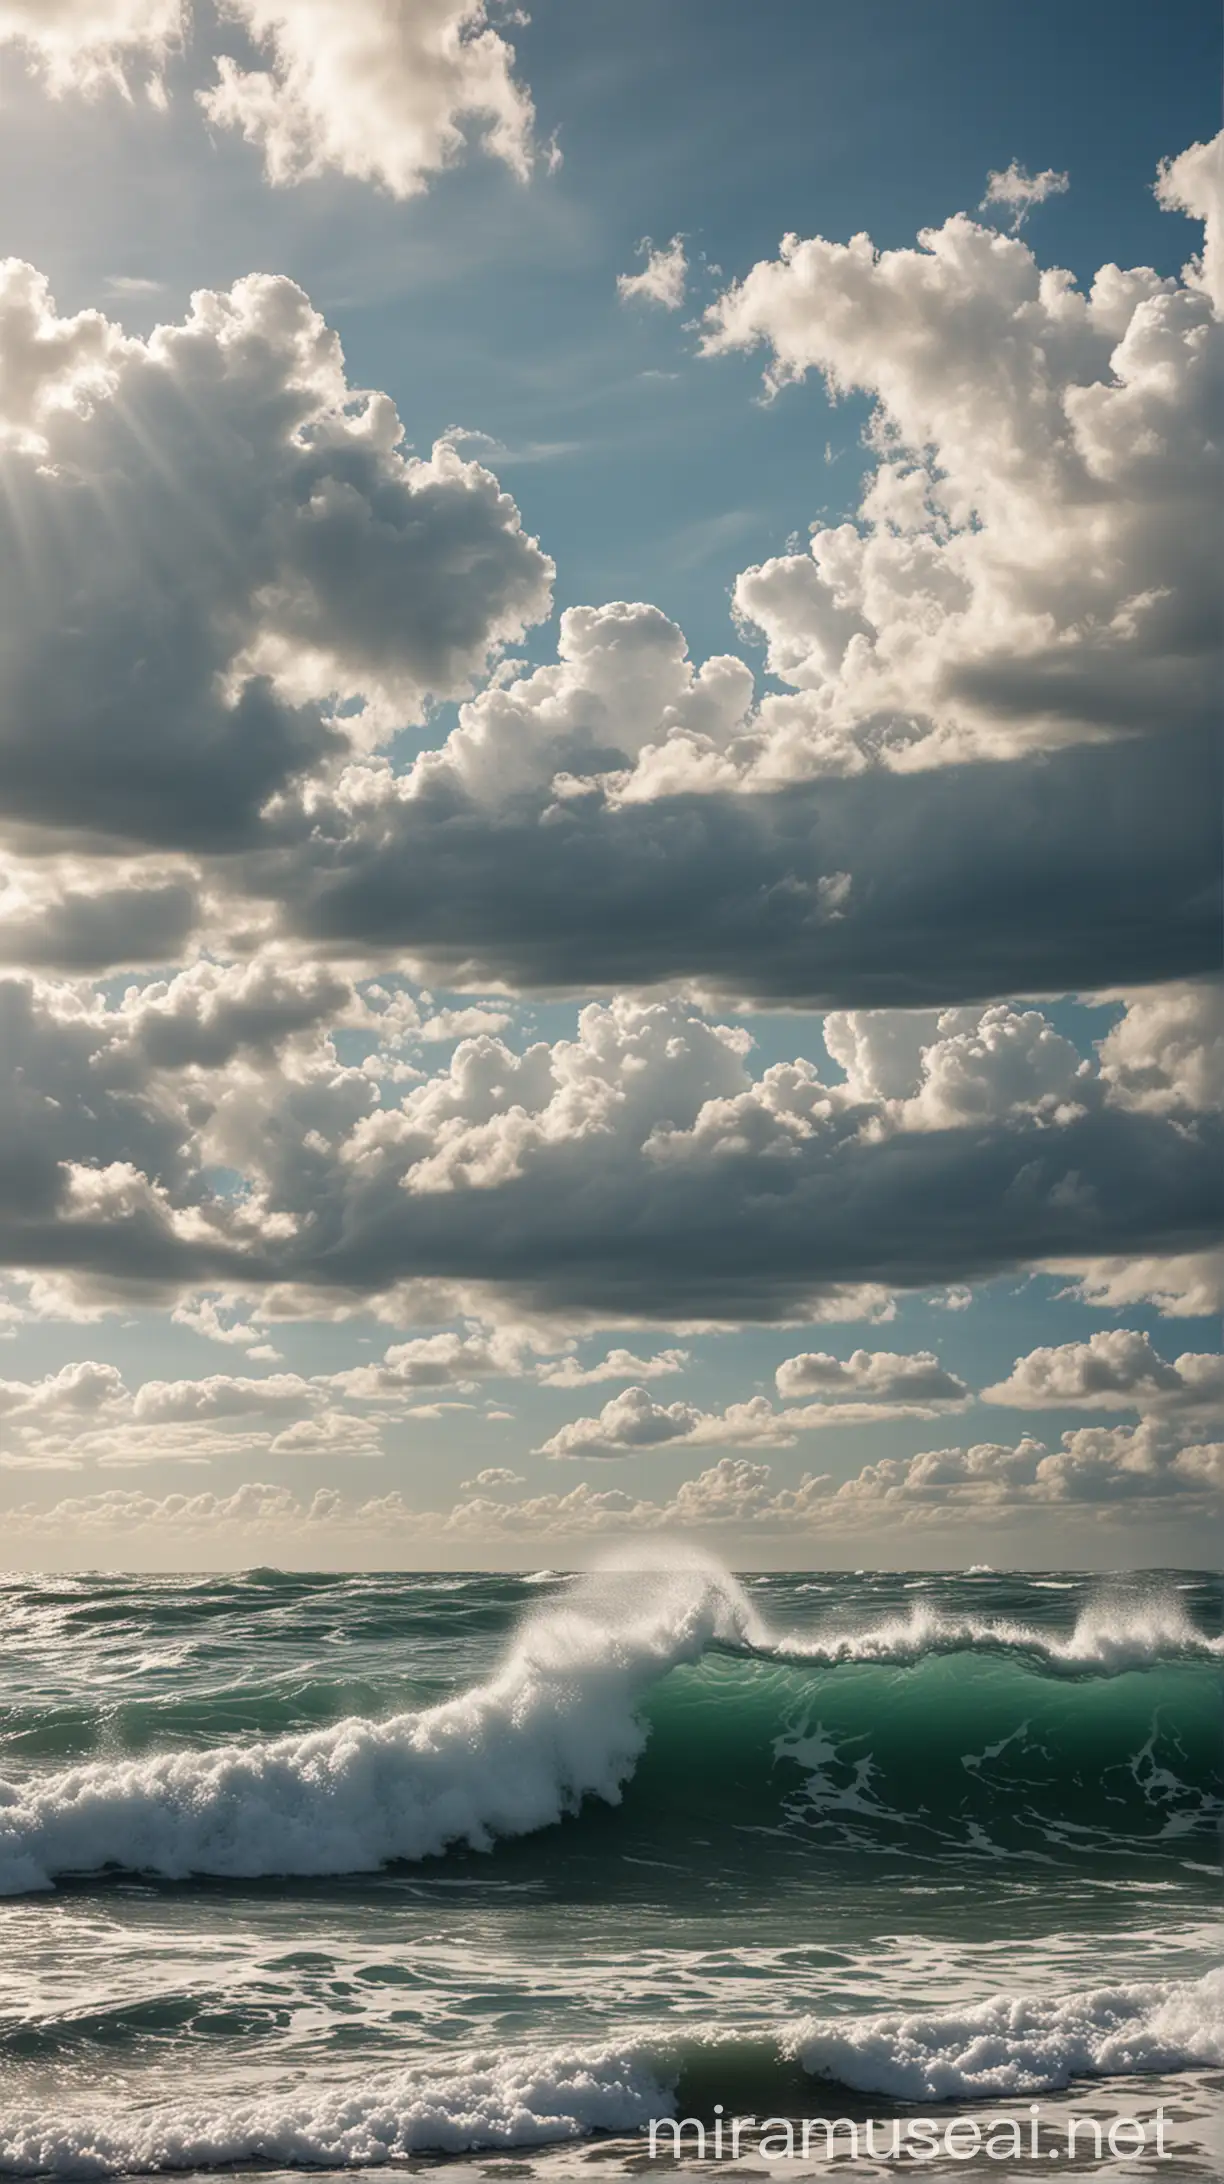 ocean waves with clouds above on a sunny day